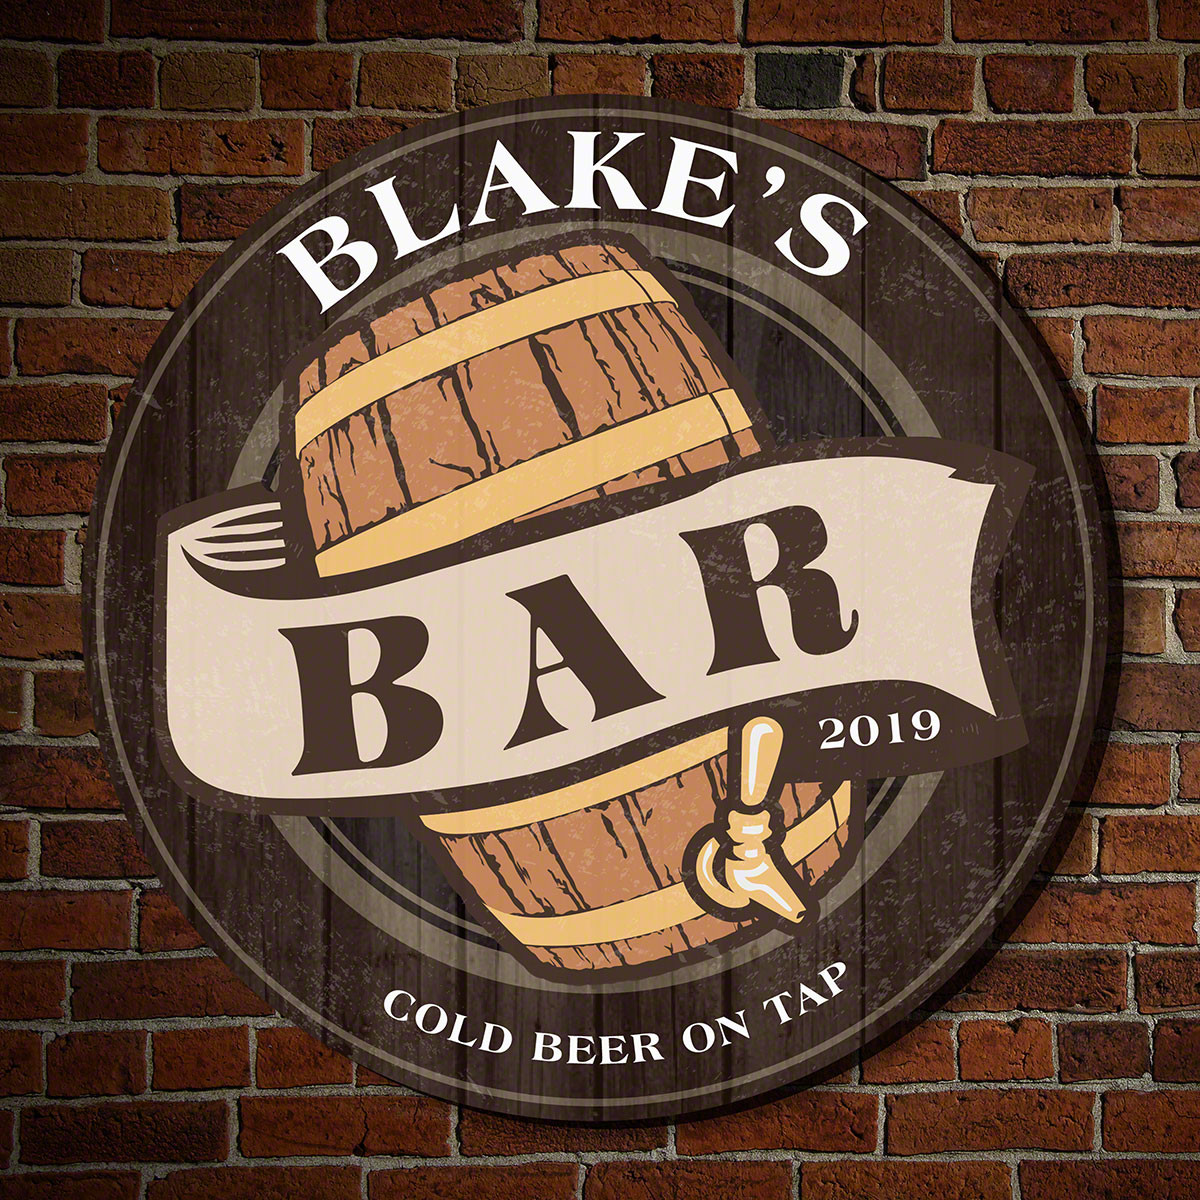 What better way to welcome friends to your home than with this Old Fashioned Beer Barrel custom wooden bar sign. Made to order with a vintage-style barrel & tap, each piece of wall decor comes personalized with two lines of custom text and the year of you #bar